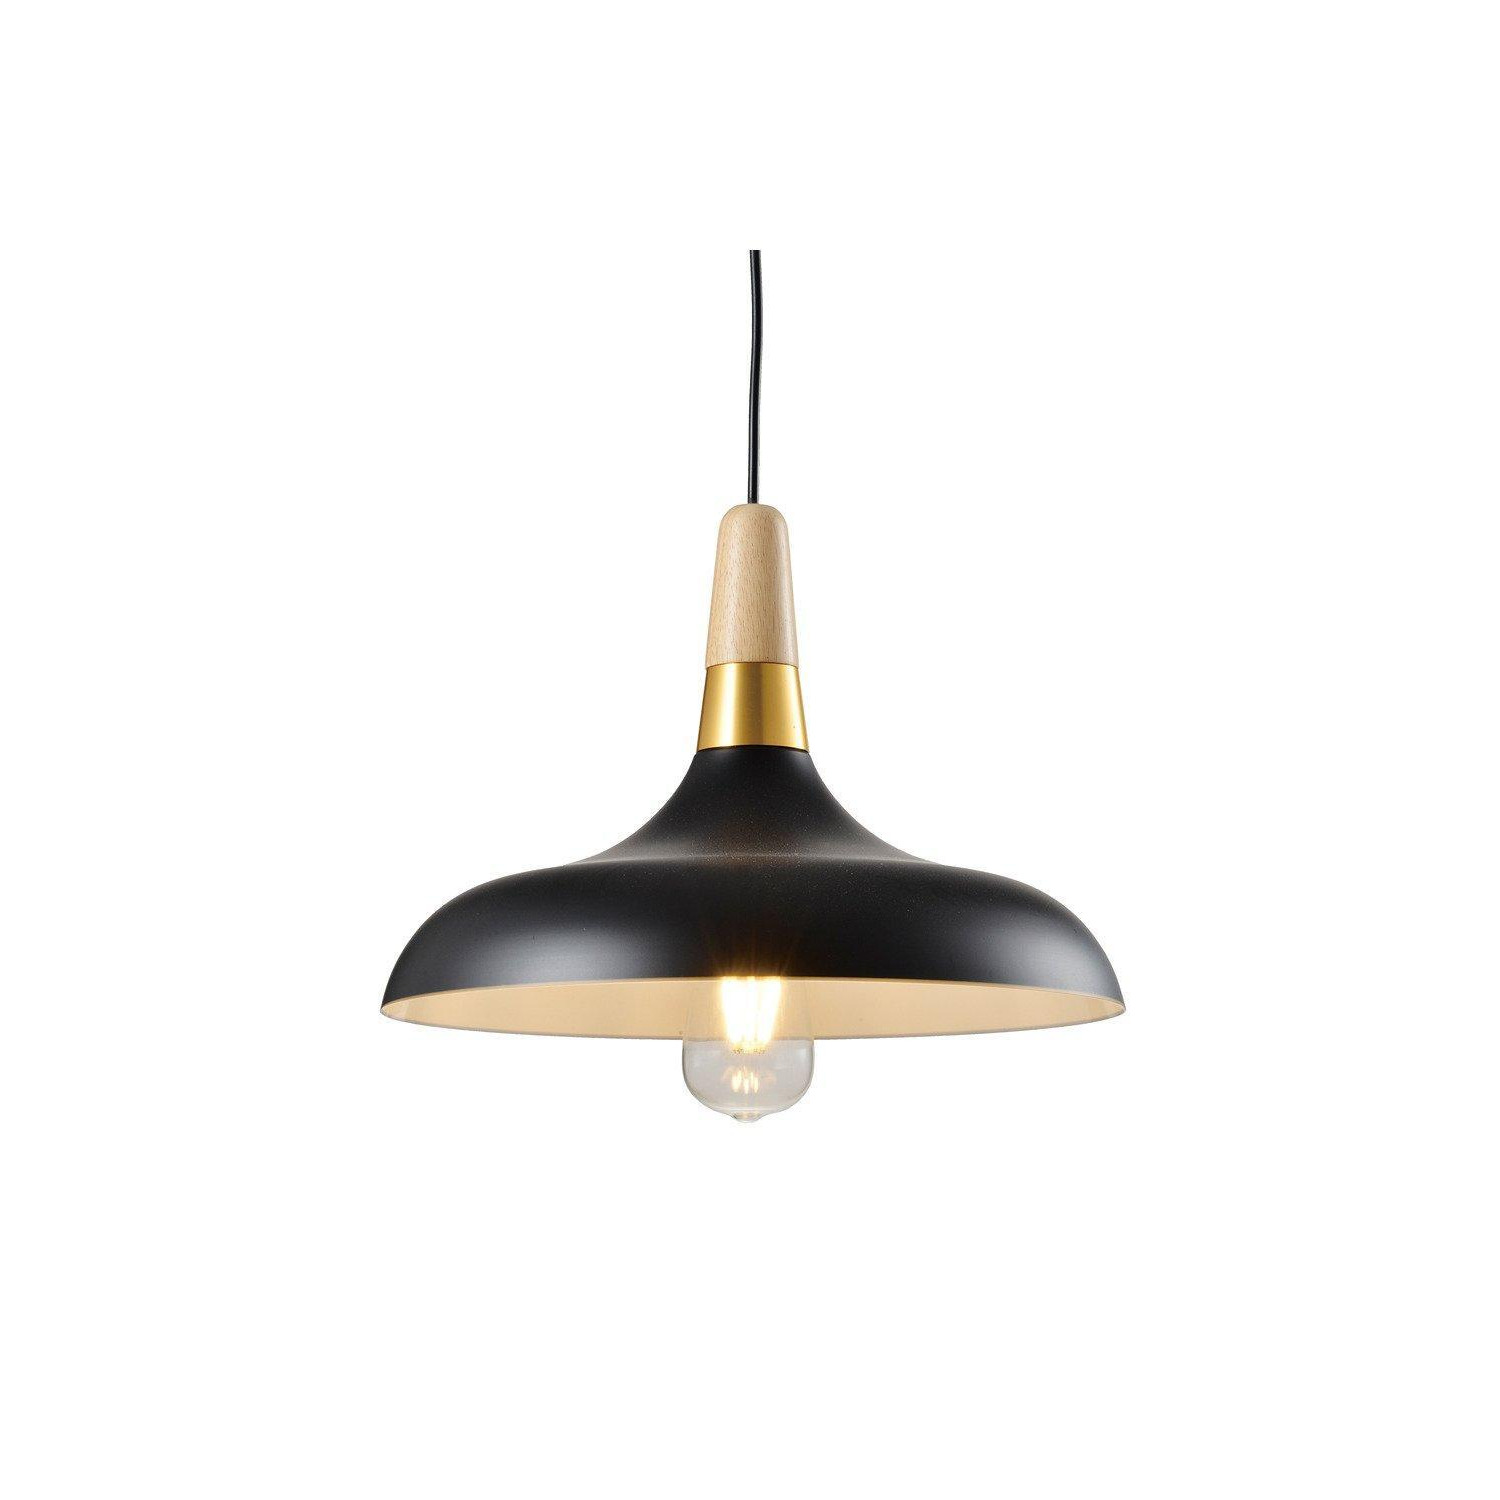 'Esther'  Black Dome Ceiling Pendant Light With Wood & Gold Accents - image 1